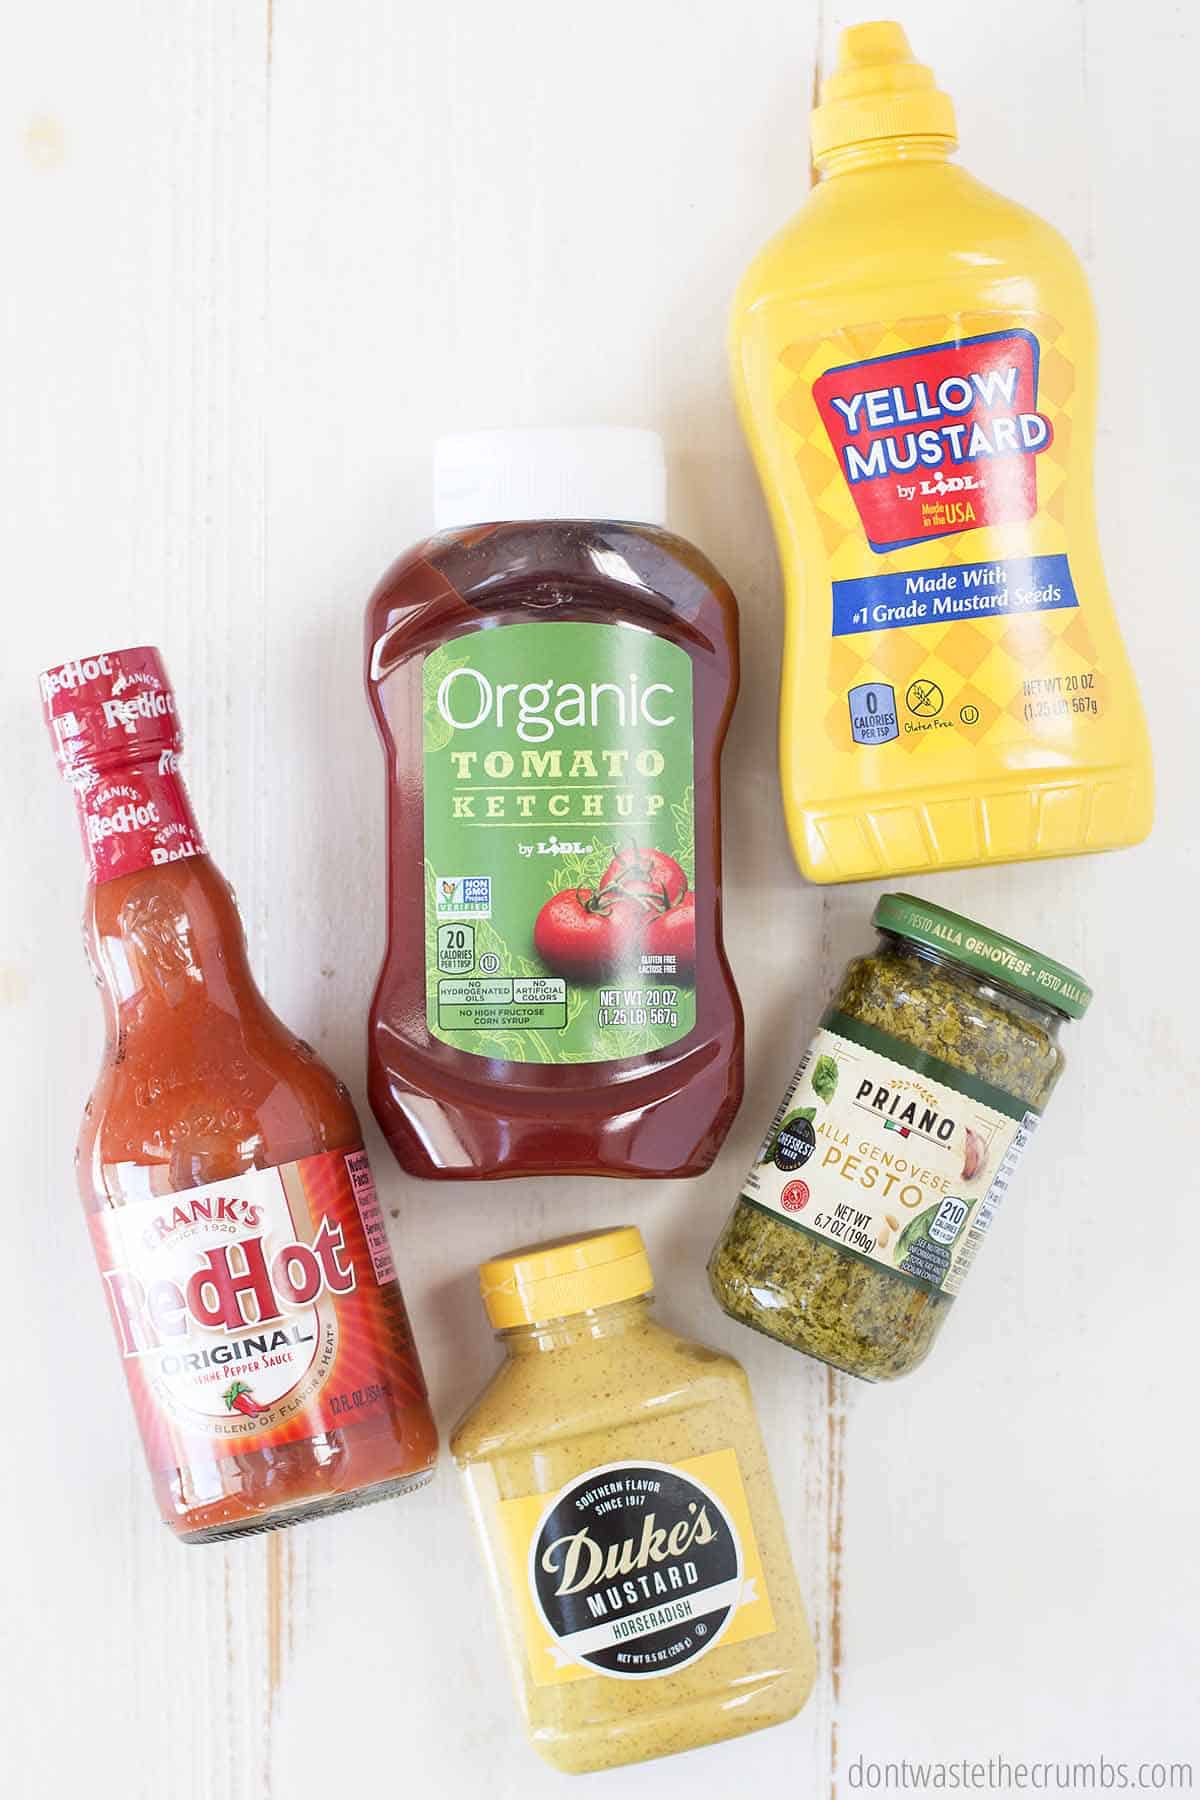 Find name brand and organic foods at discount at LIDL.